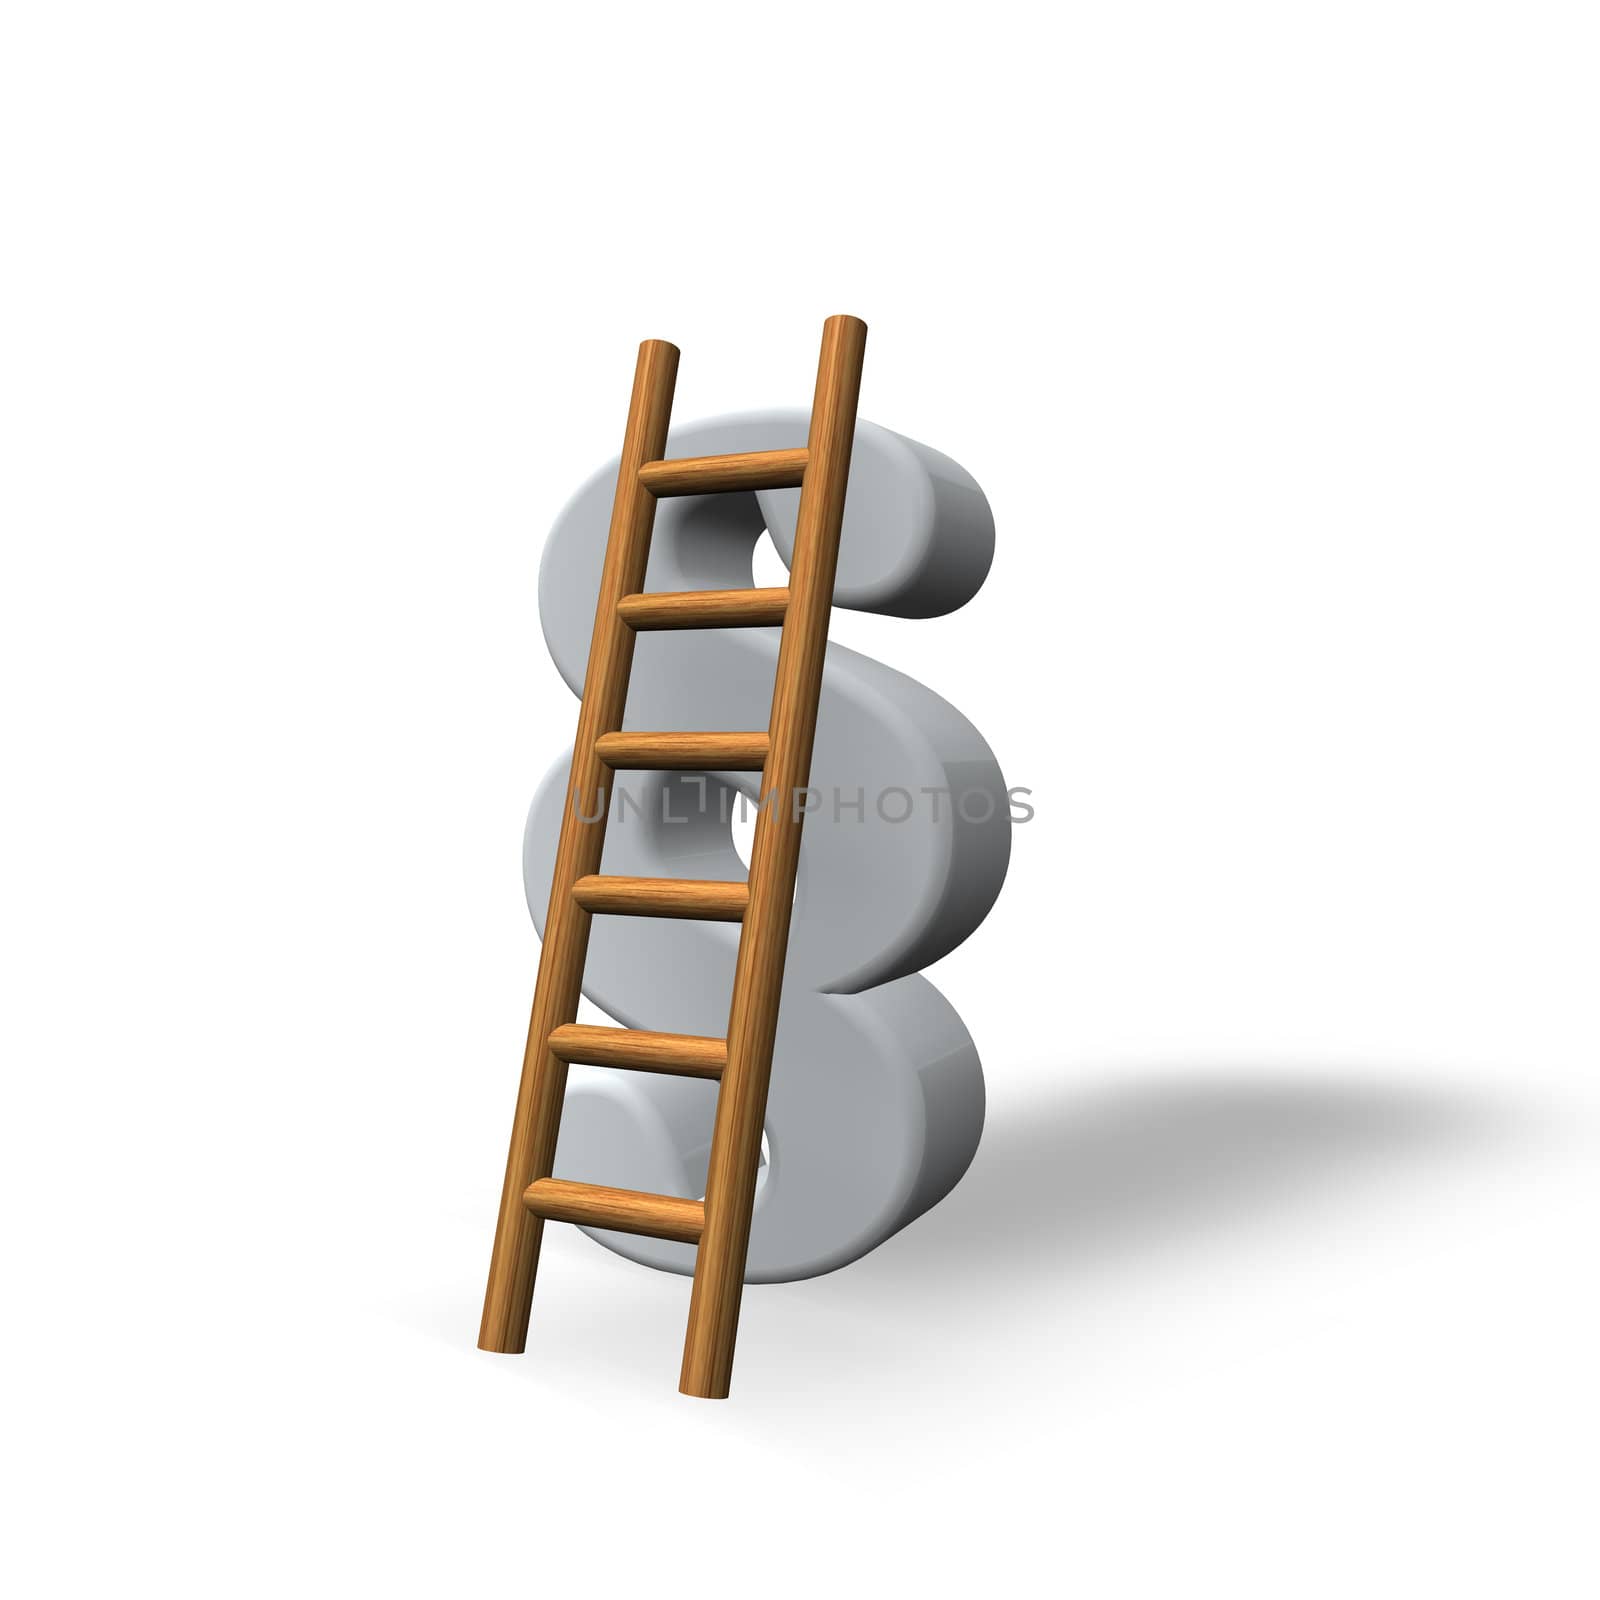 paragraph sign and a ladder on white background - 3d illustration